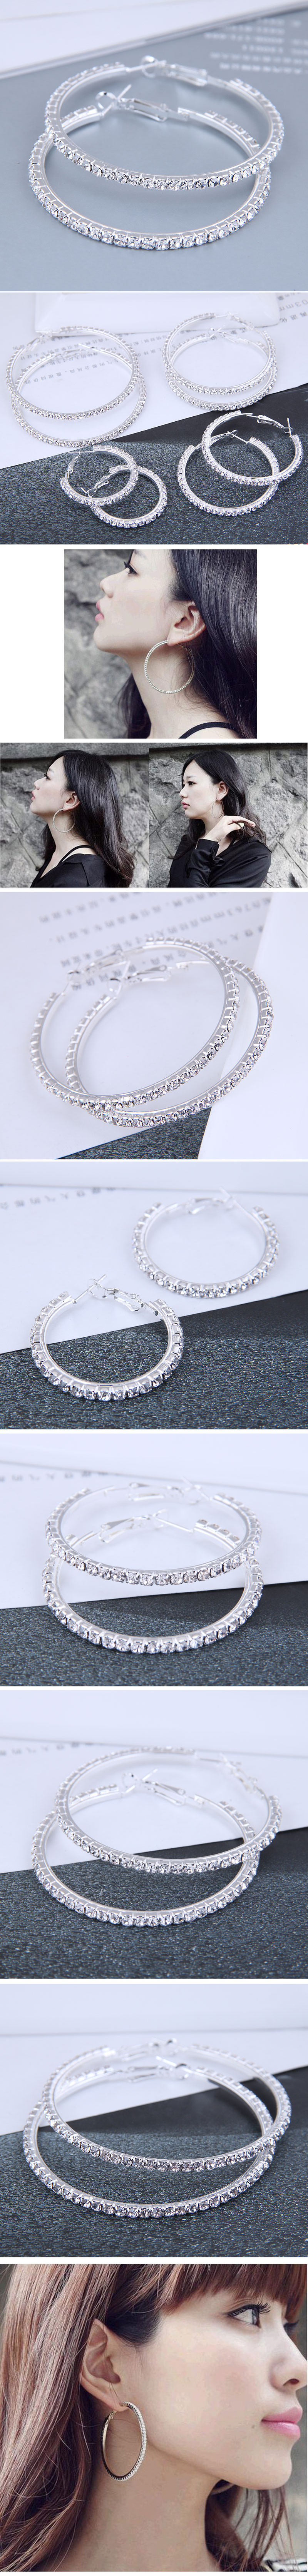 50mm Korean full diamond large circle high quality earringspicture1